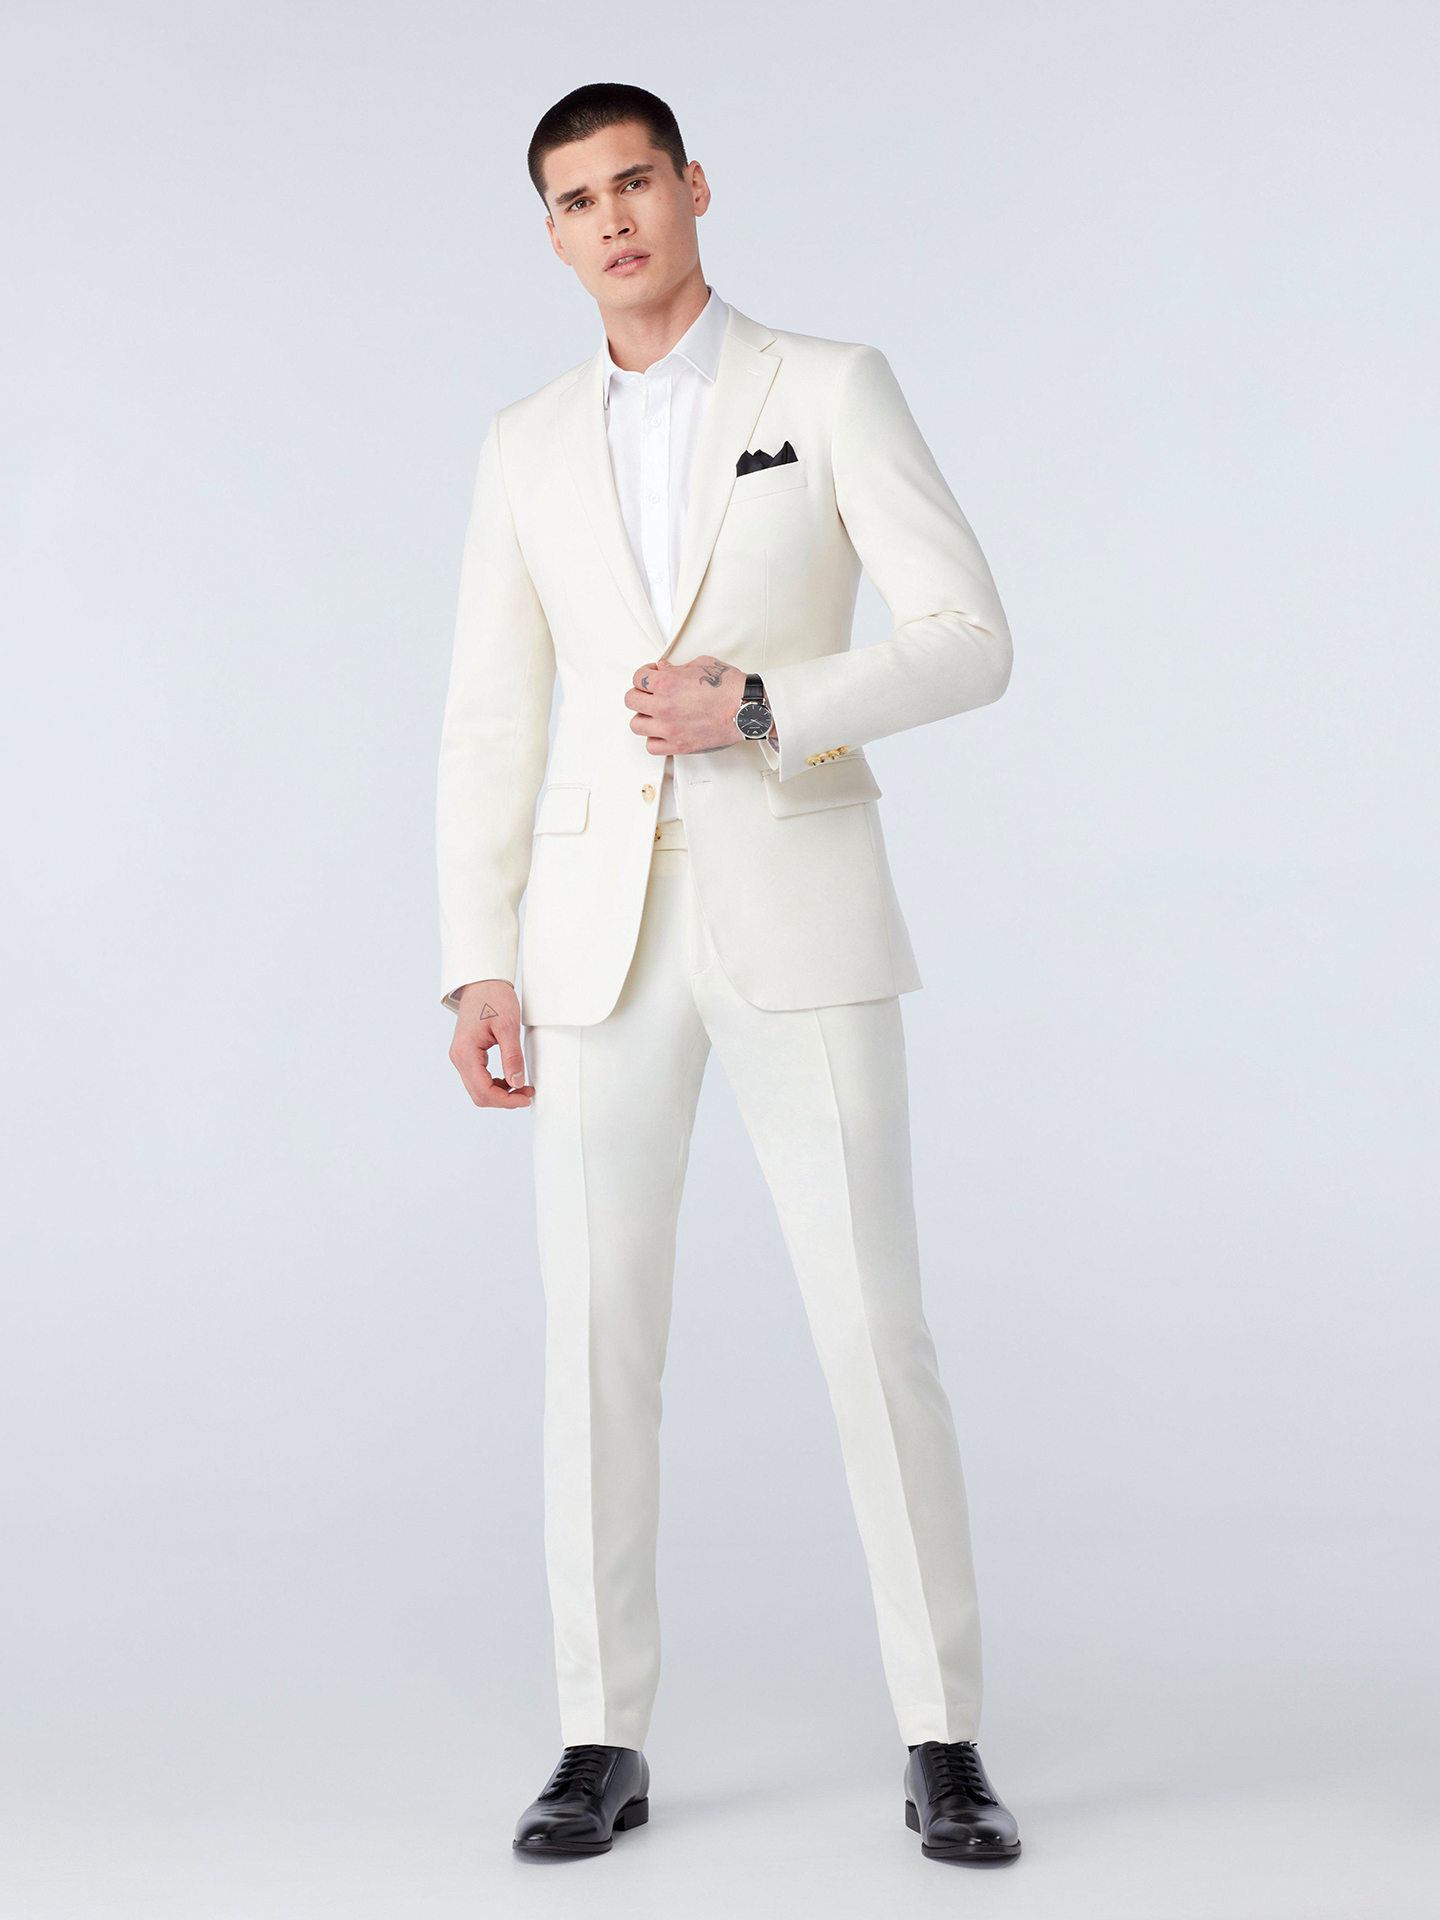 ivory white suit, white dress shirt, and black derby shoes